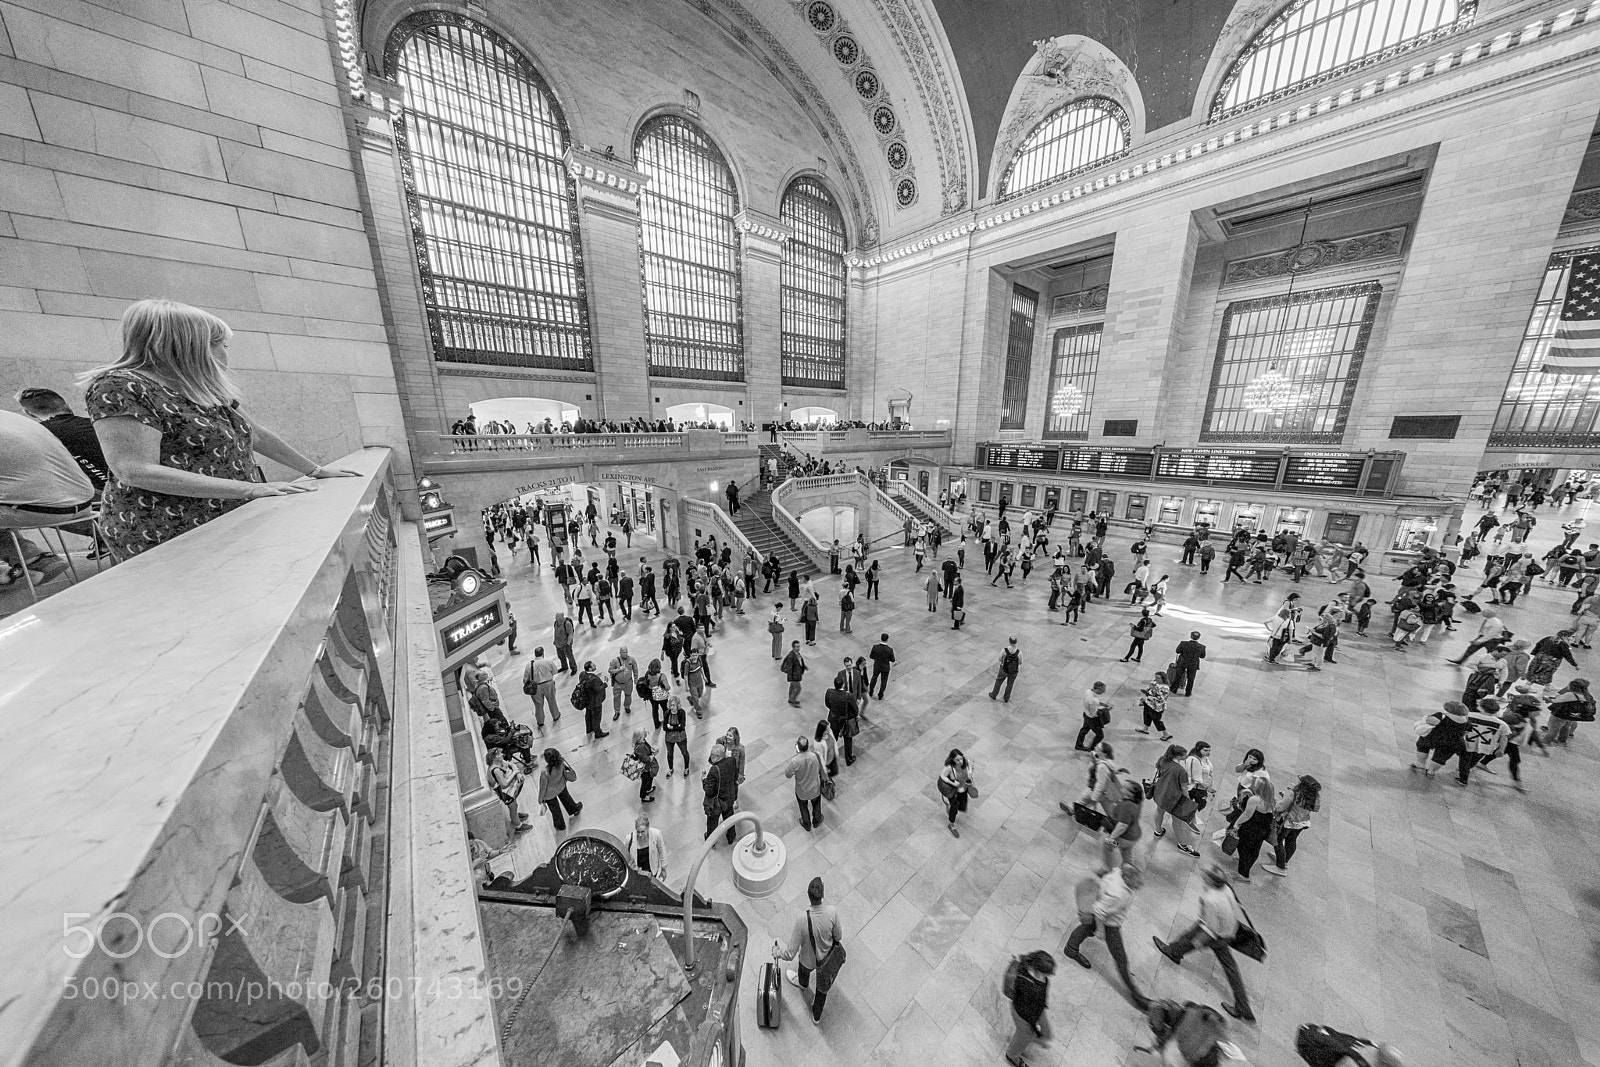 Sony a7R III sample photo. Grand central station photography